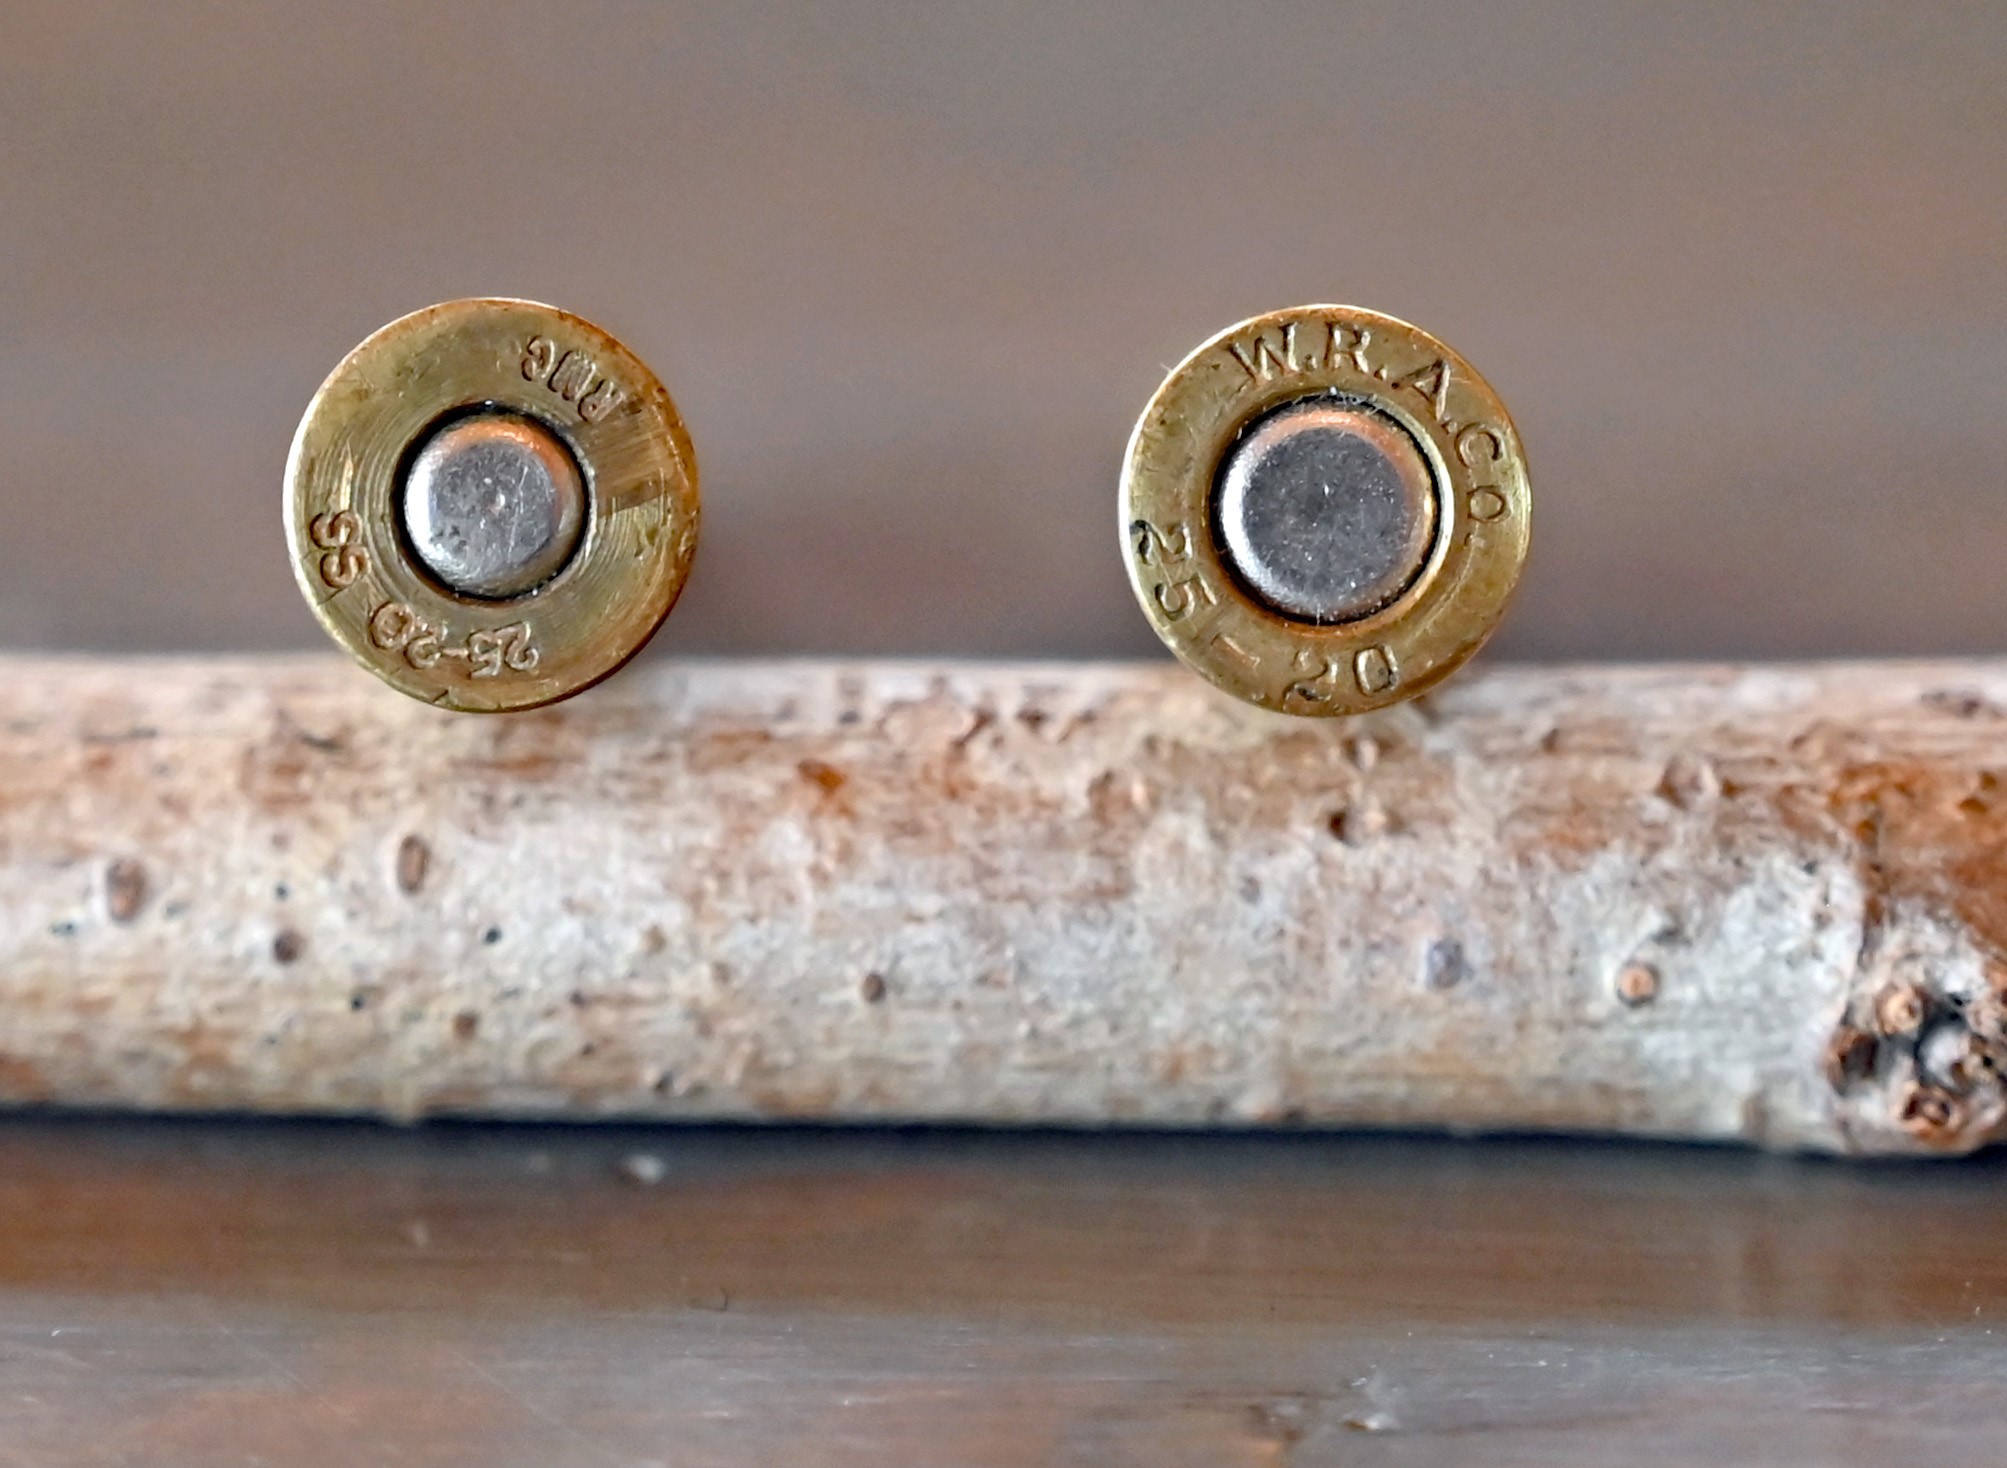 Modern Rocky Mountain Cartridge 25-20 Single Shot case on left, showing the Small Rifle primer and a vintage WRA 25-20 Single Shot cartridge with Large Rifle primer.